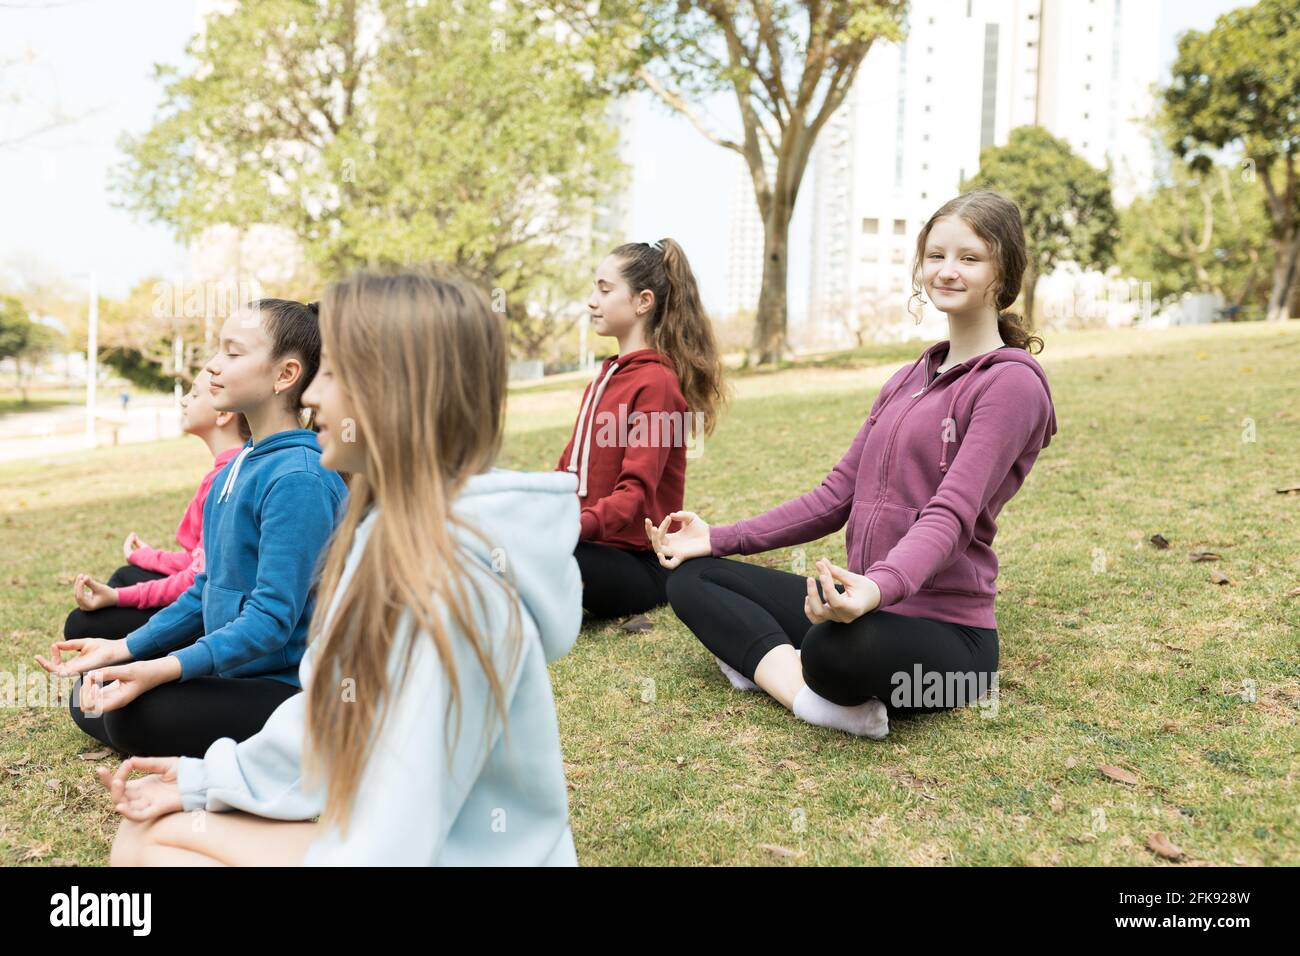 Group of girls practicing yoga outside Stock Photo